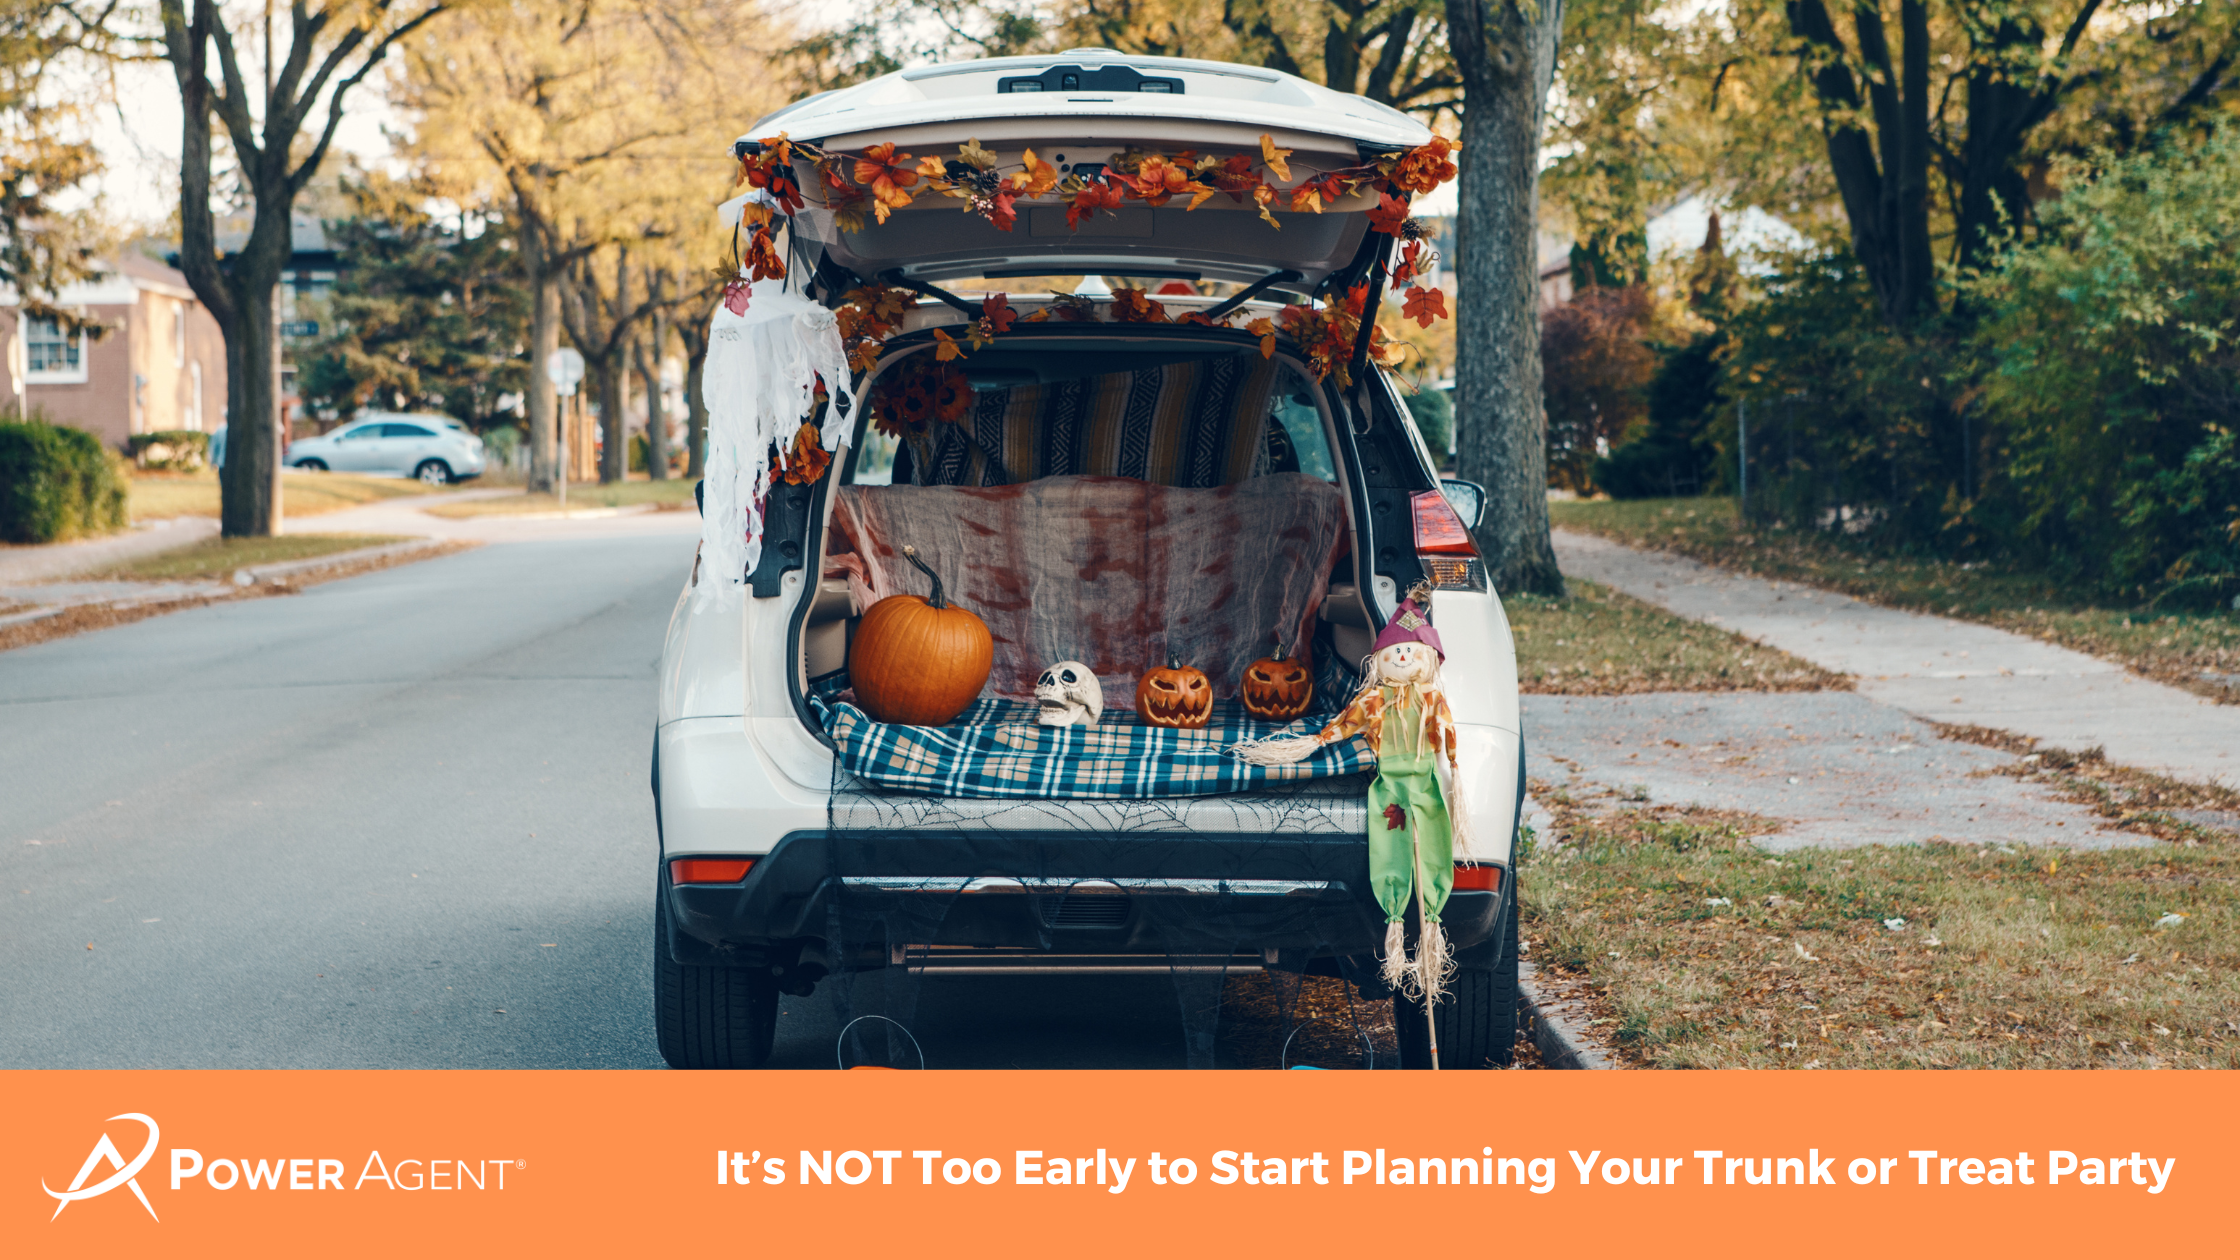 It’s NOT Too Early to Start Planning Your Trunk or Treat Party